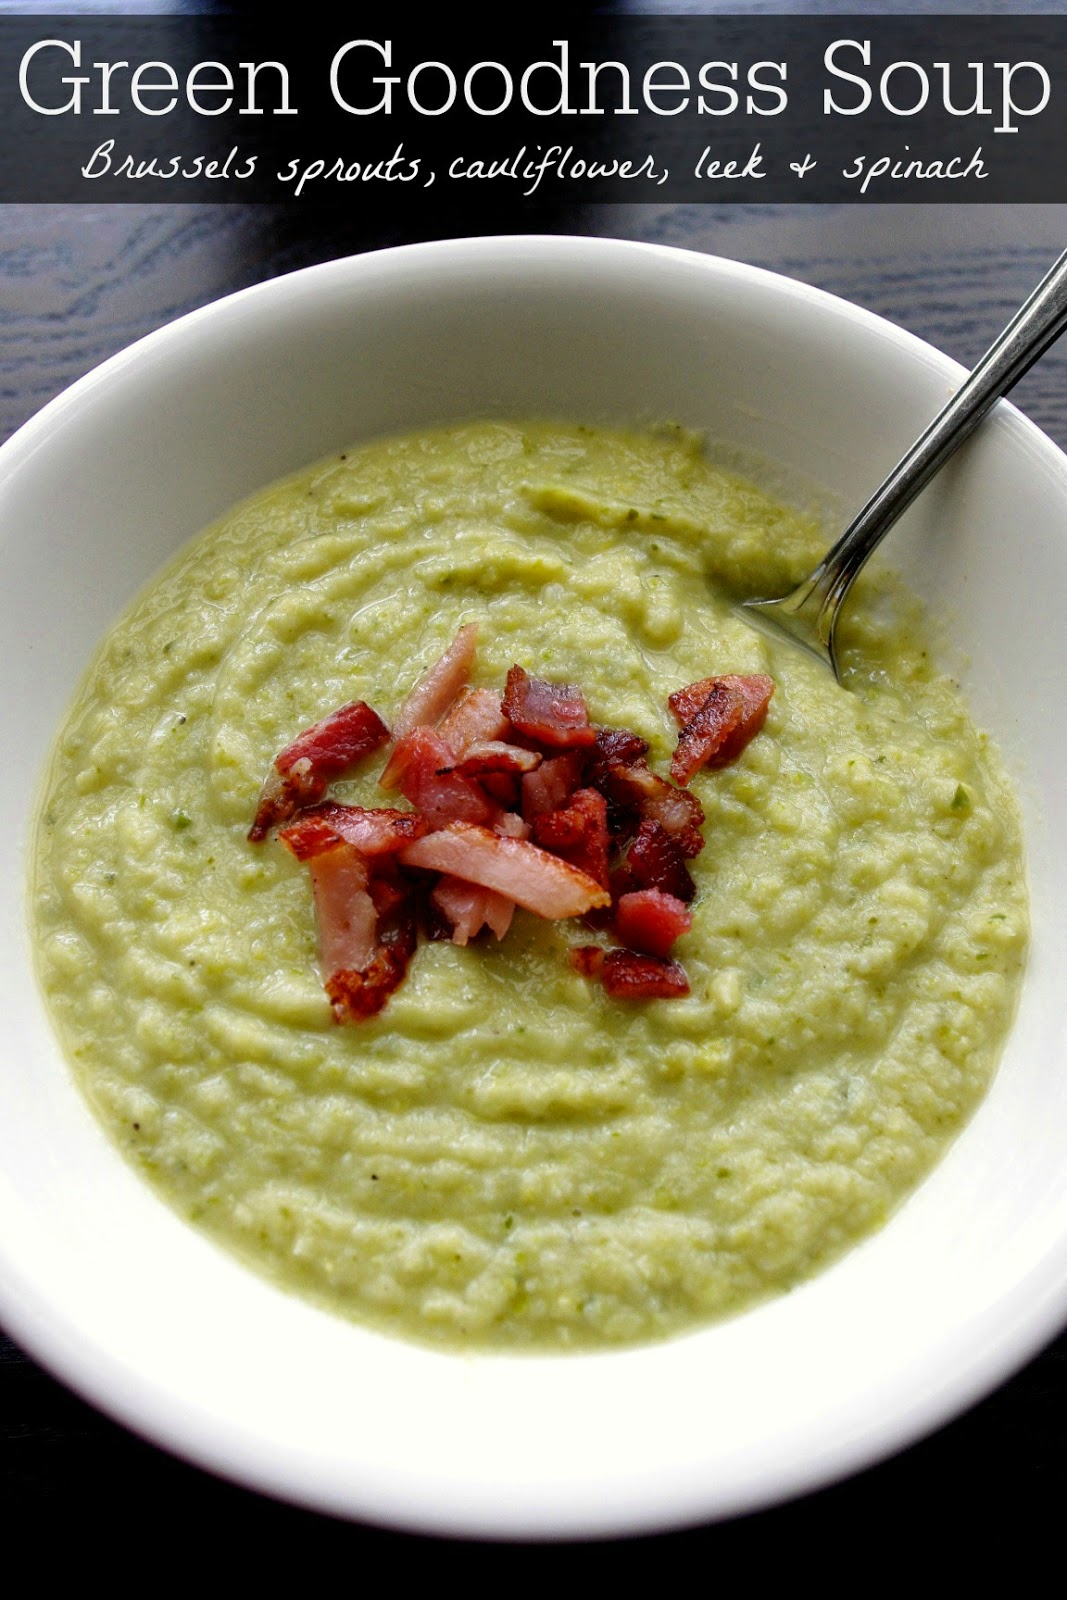 Brussels Sprout, leek and spinach soup